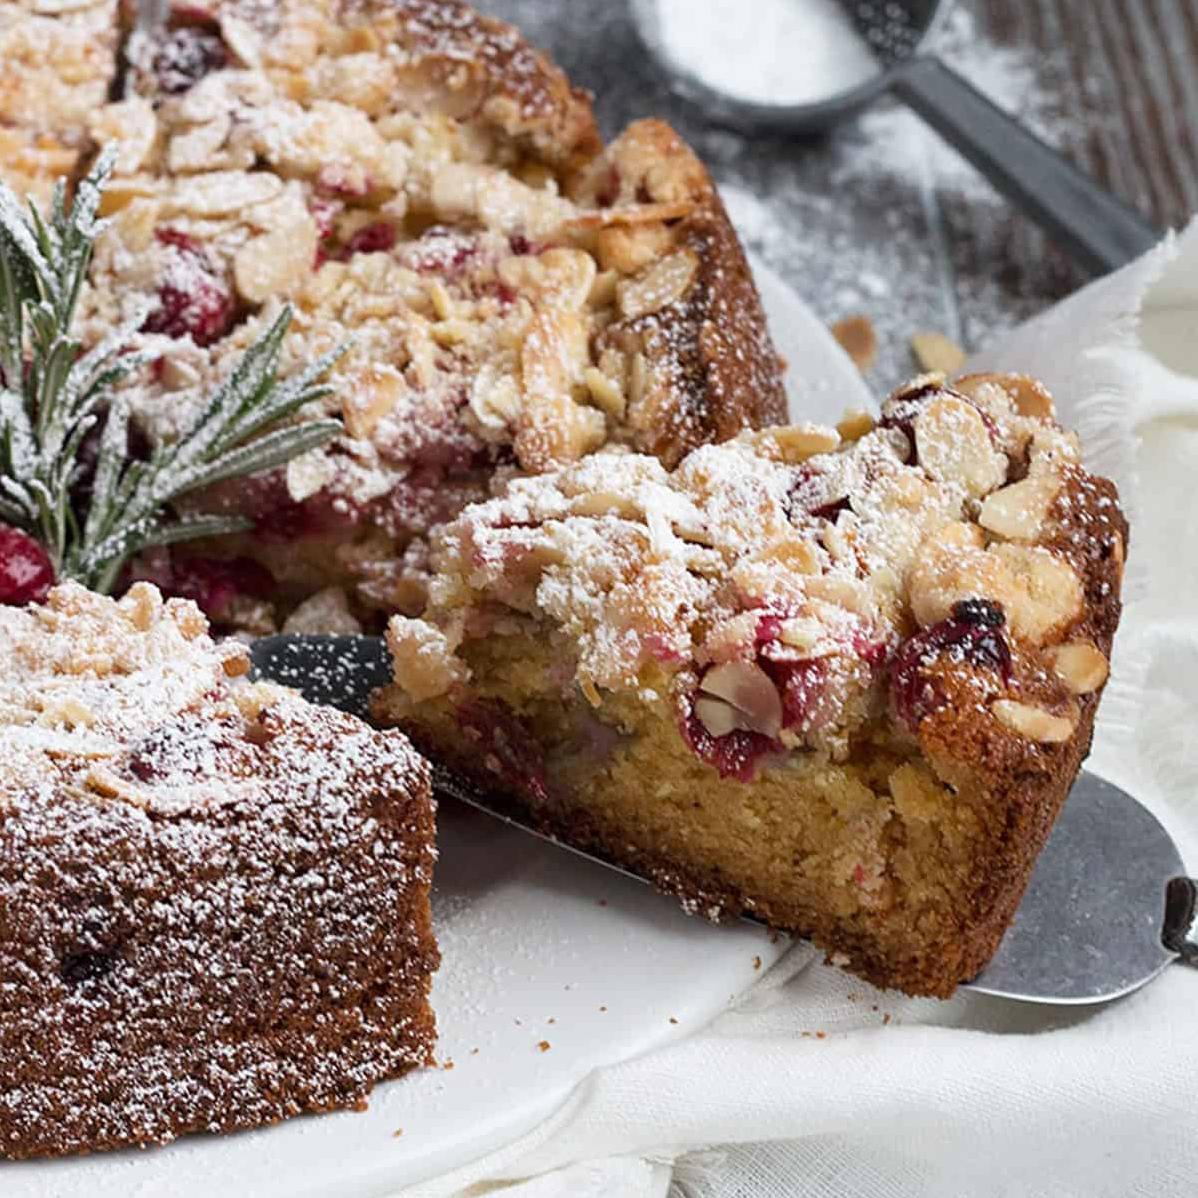  This cranberry almond coffee cake is perfect for brunch with friends.